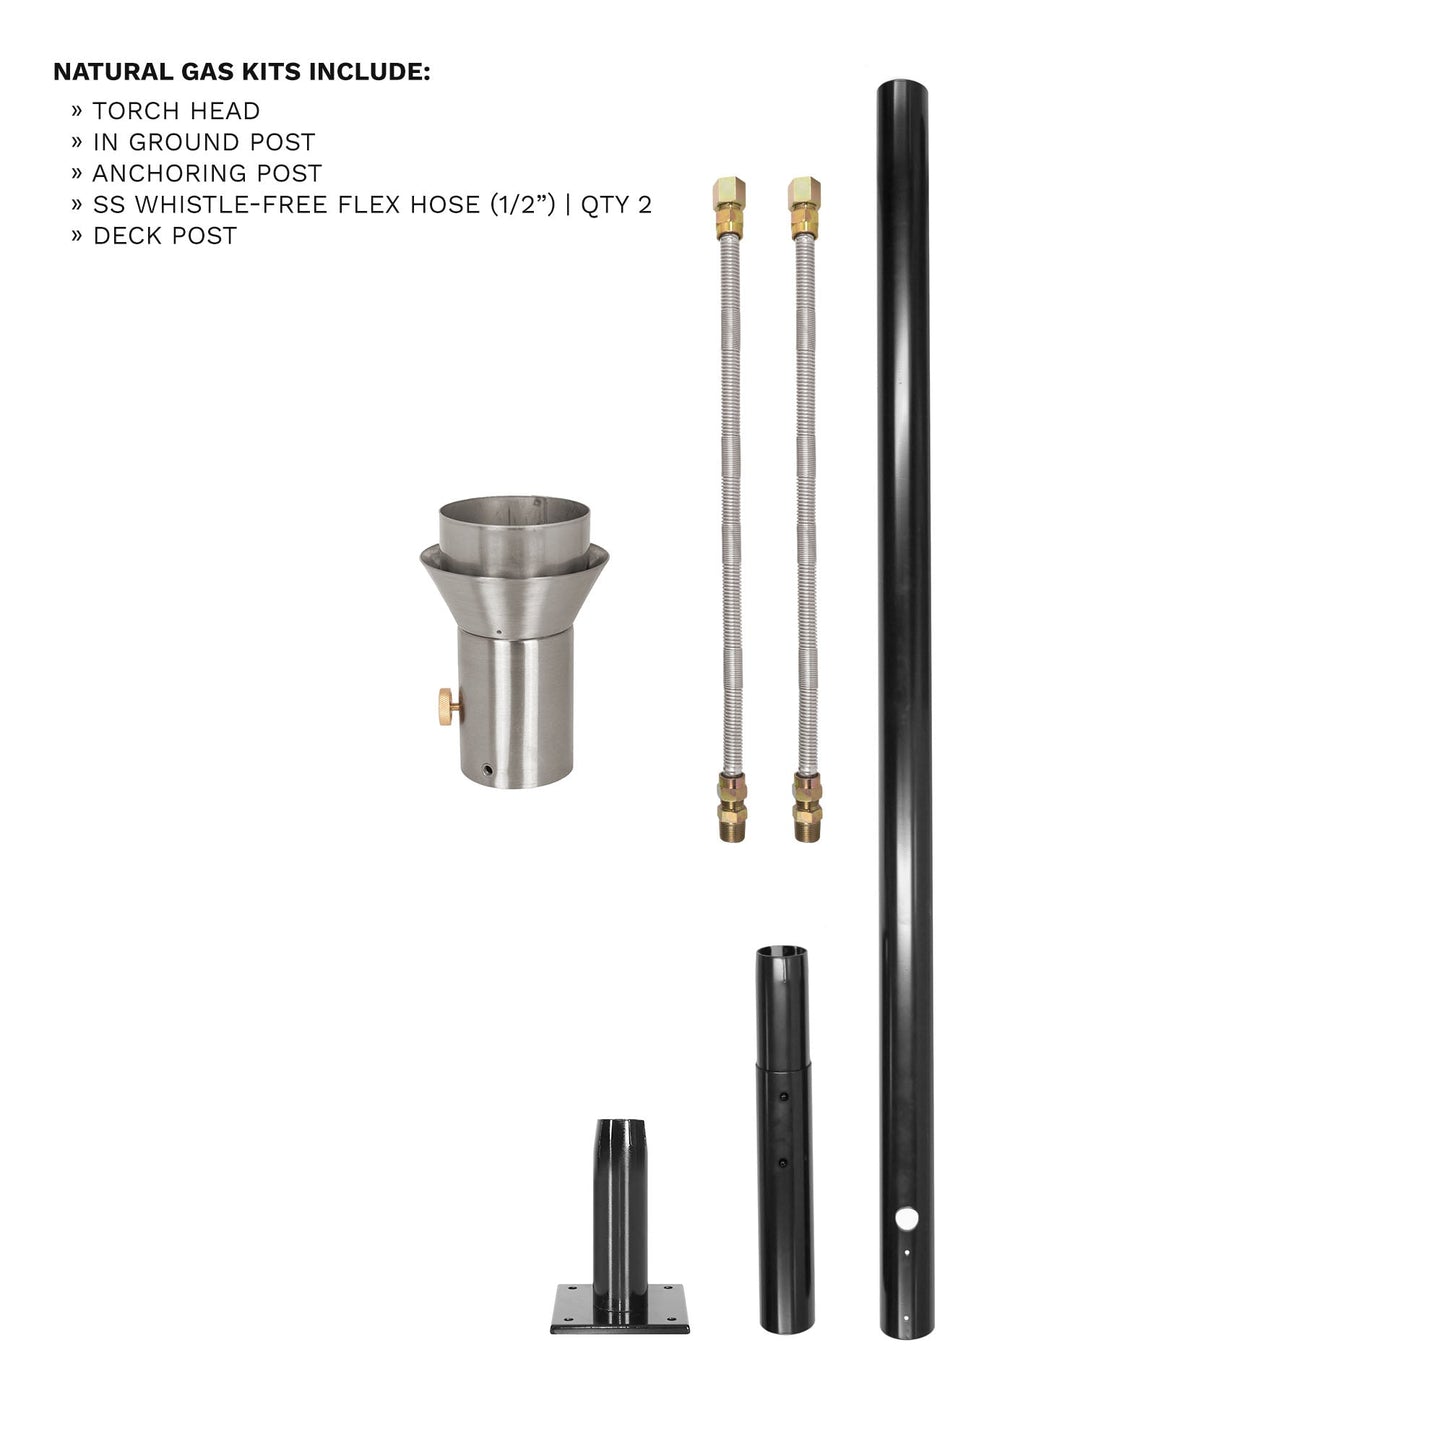 Tiki Original TOP Torch & Post Complete Kit - Stainless Steel - Natural Gas-Novel Home